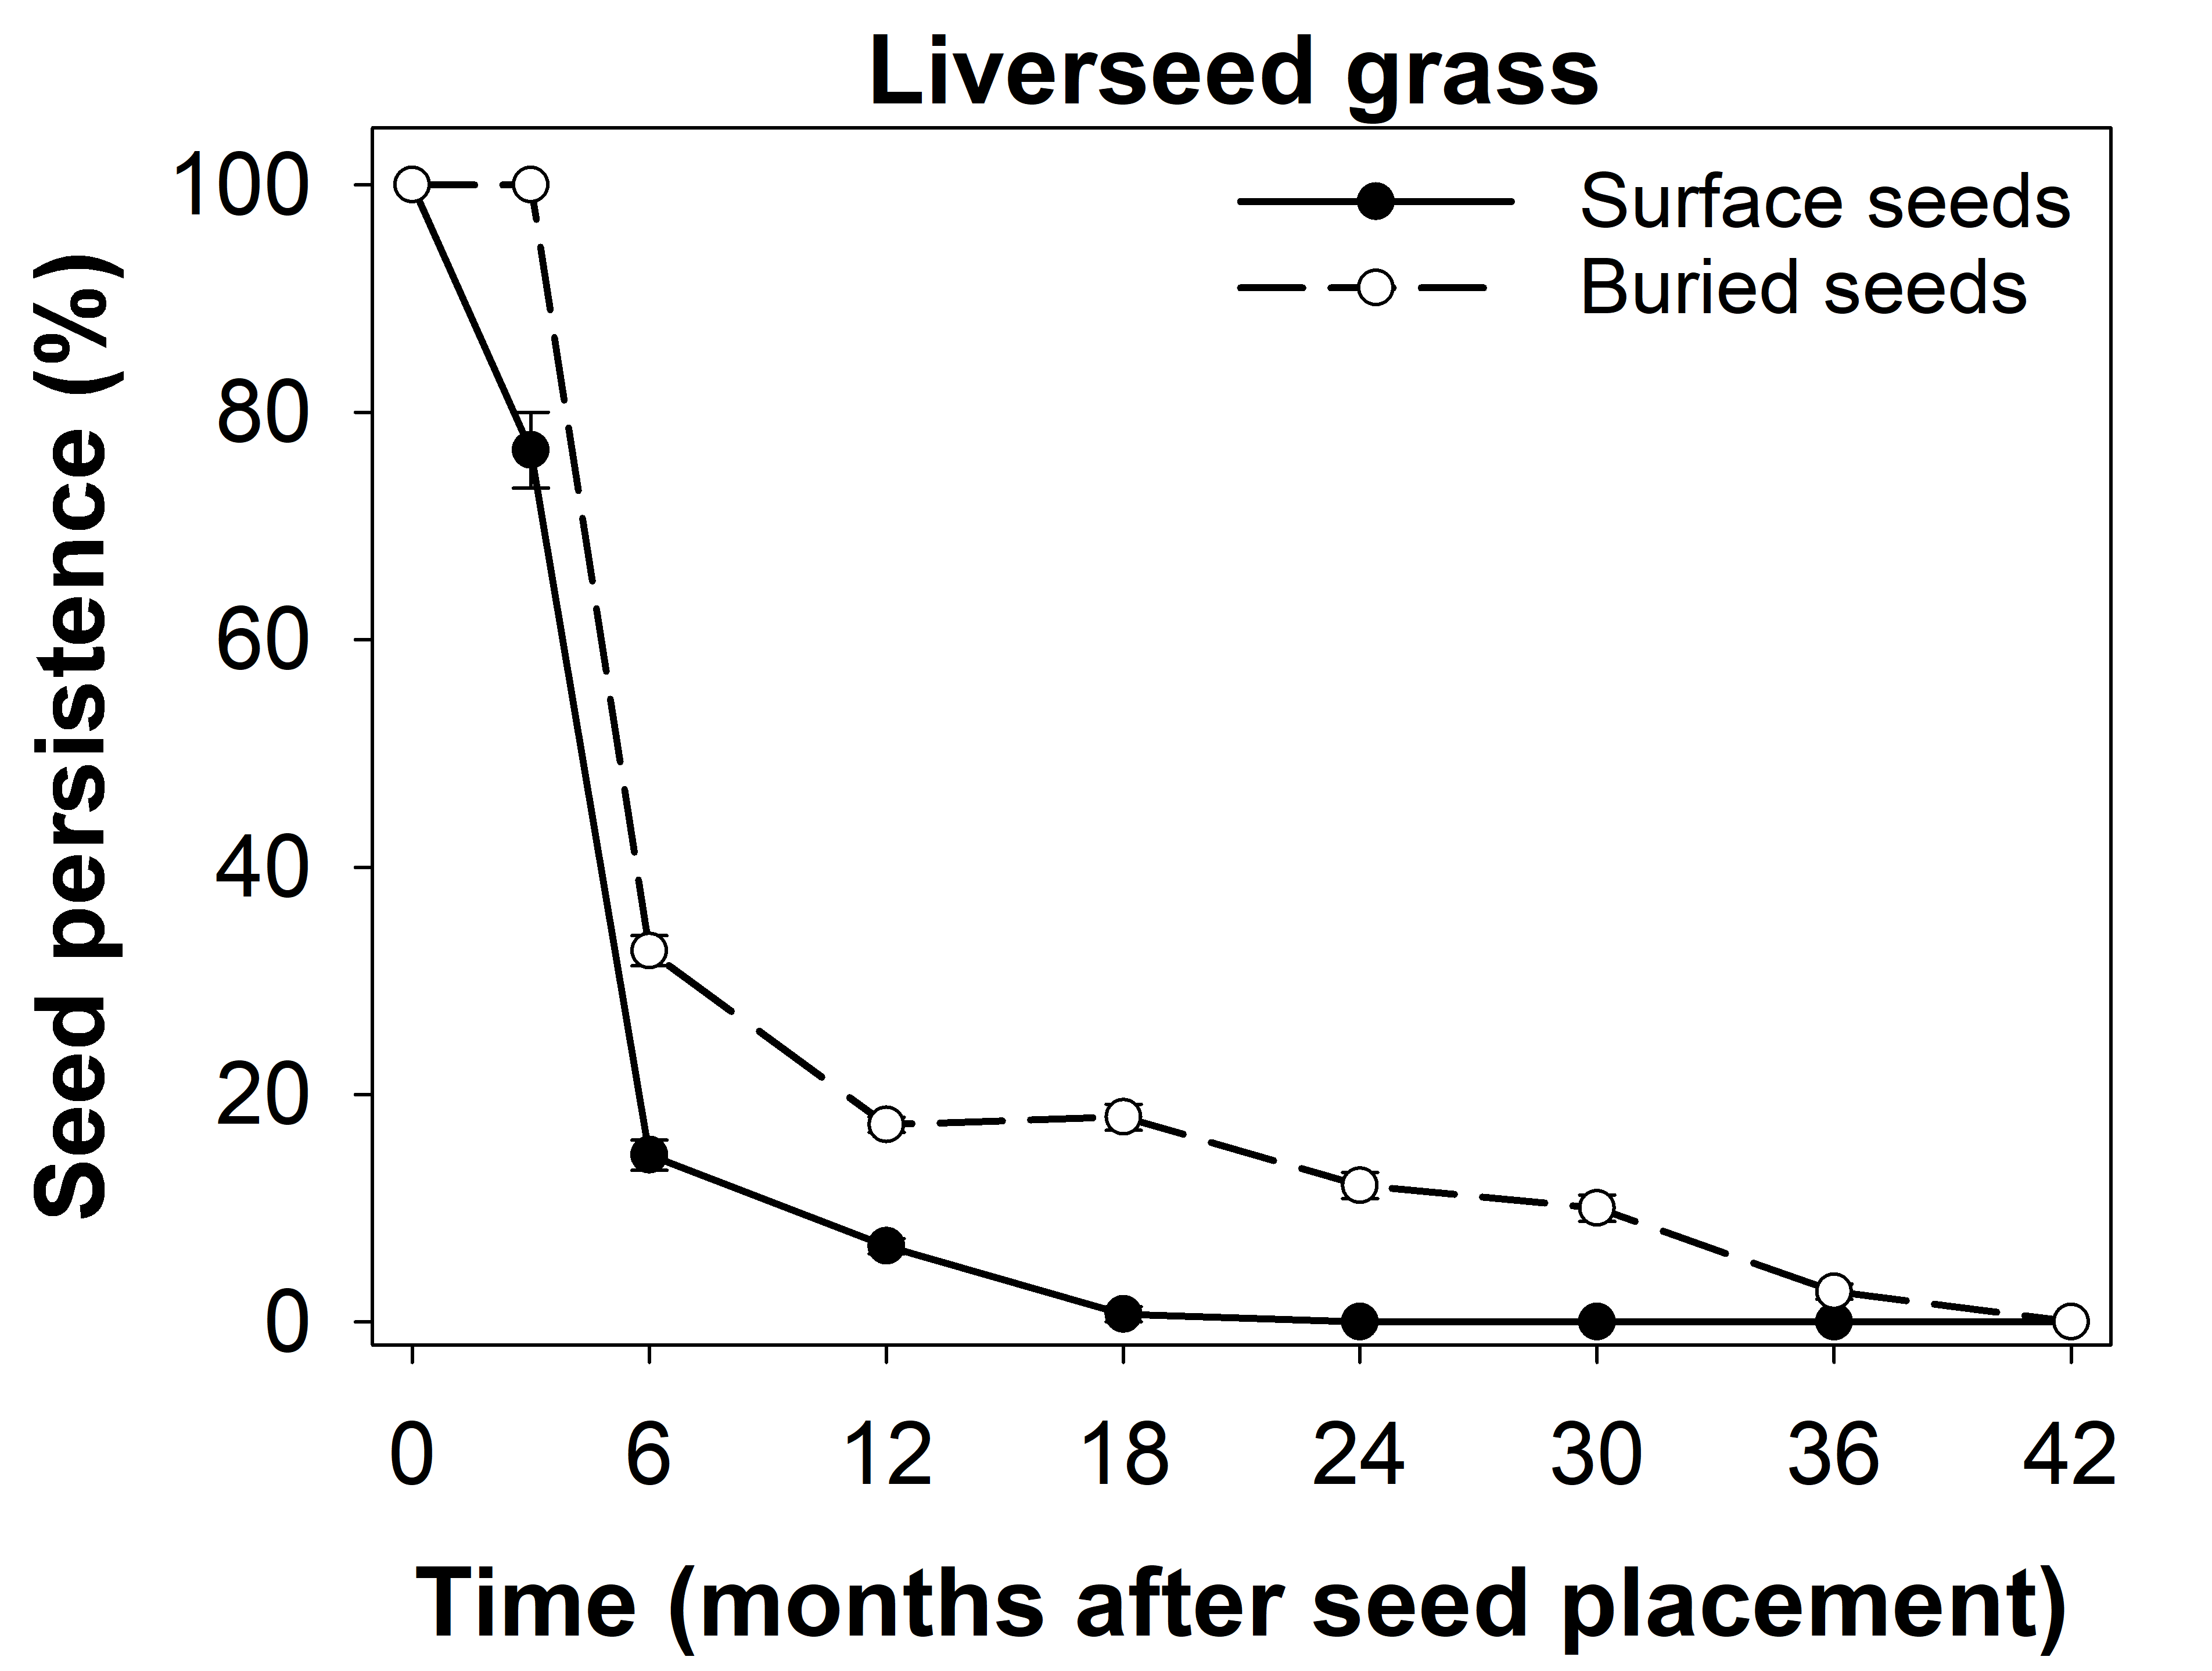 This line graph shows the persistence of liverseed grass seeds placed on the soil surface or buried at 2 cm.